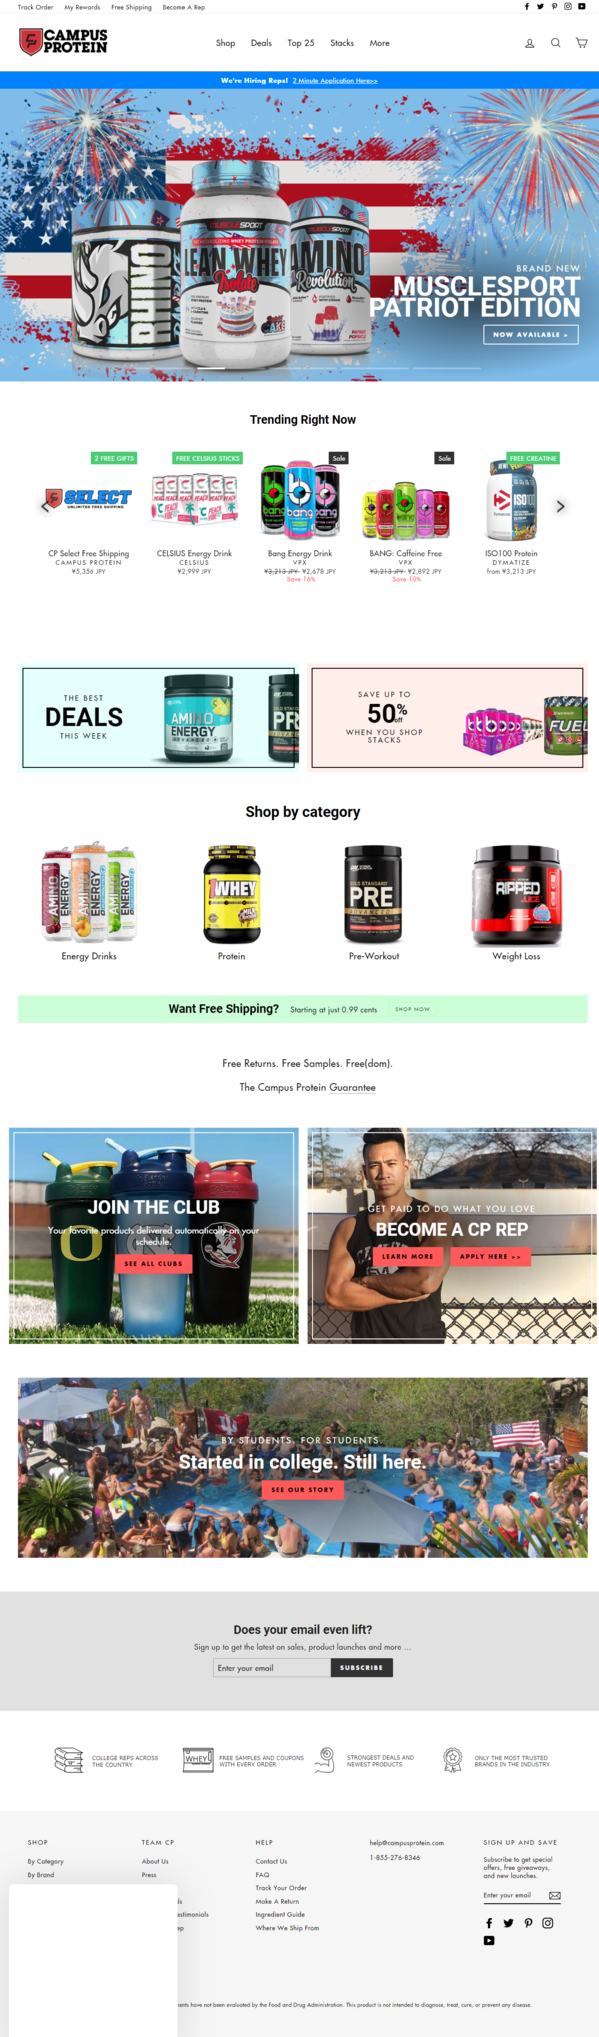 Campus Protein   Best deals on supplements for college students - CampusProtein.com.png